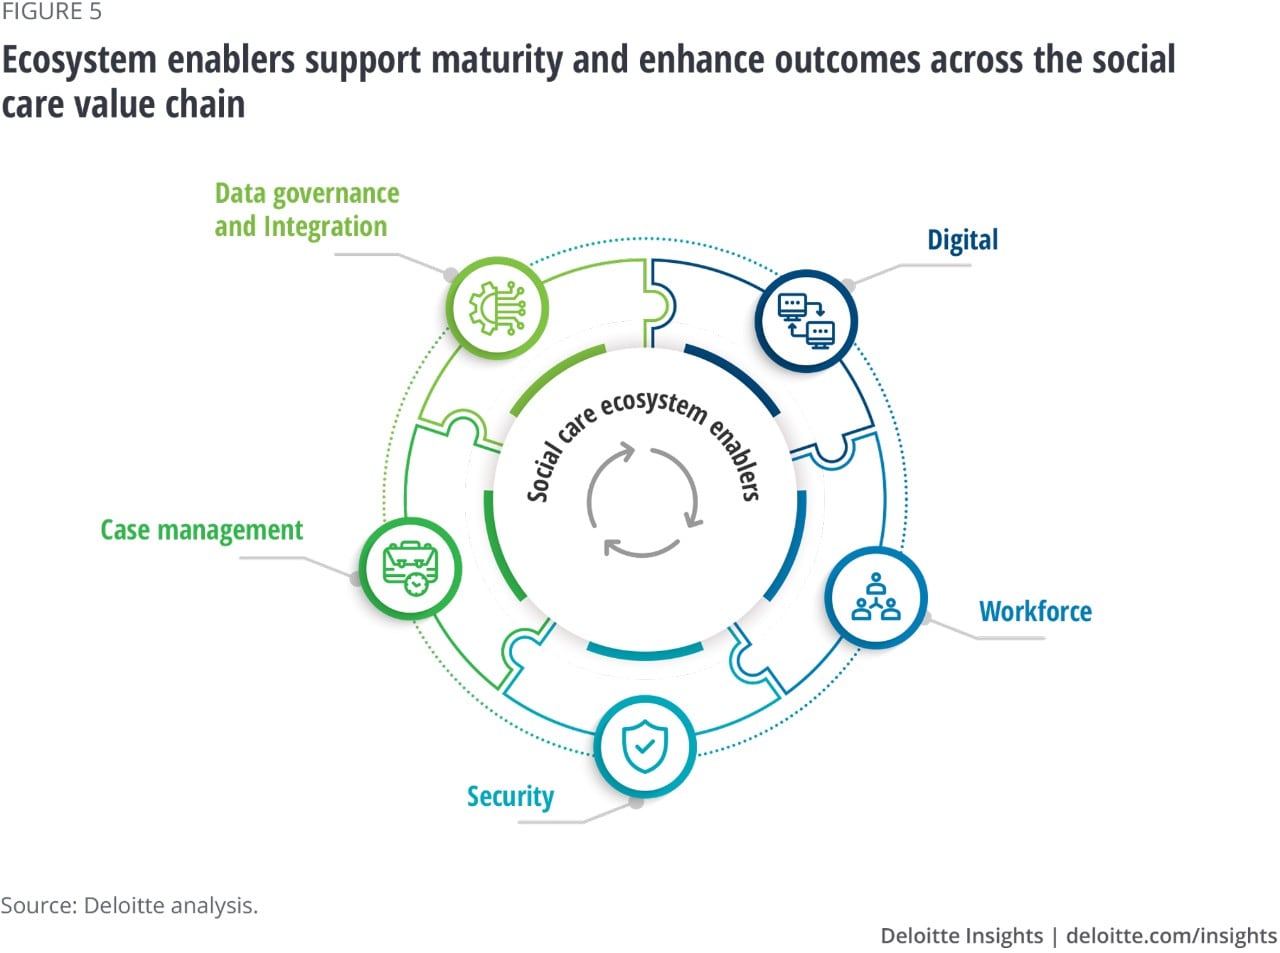 Figure 5. Ecosystem enablers support maturity and enhance outcomes across the social care value chain